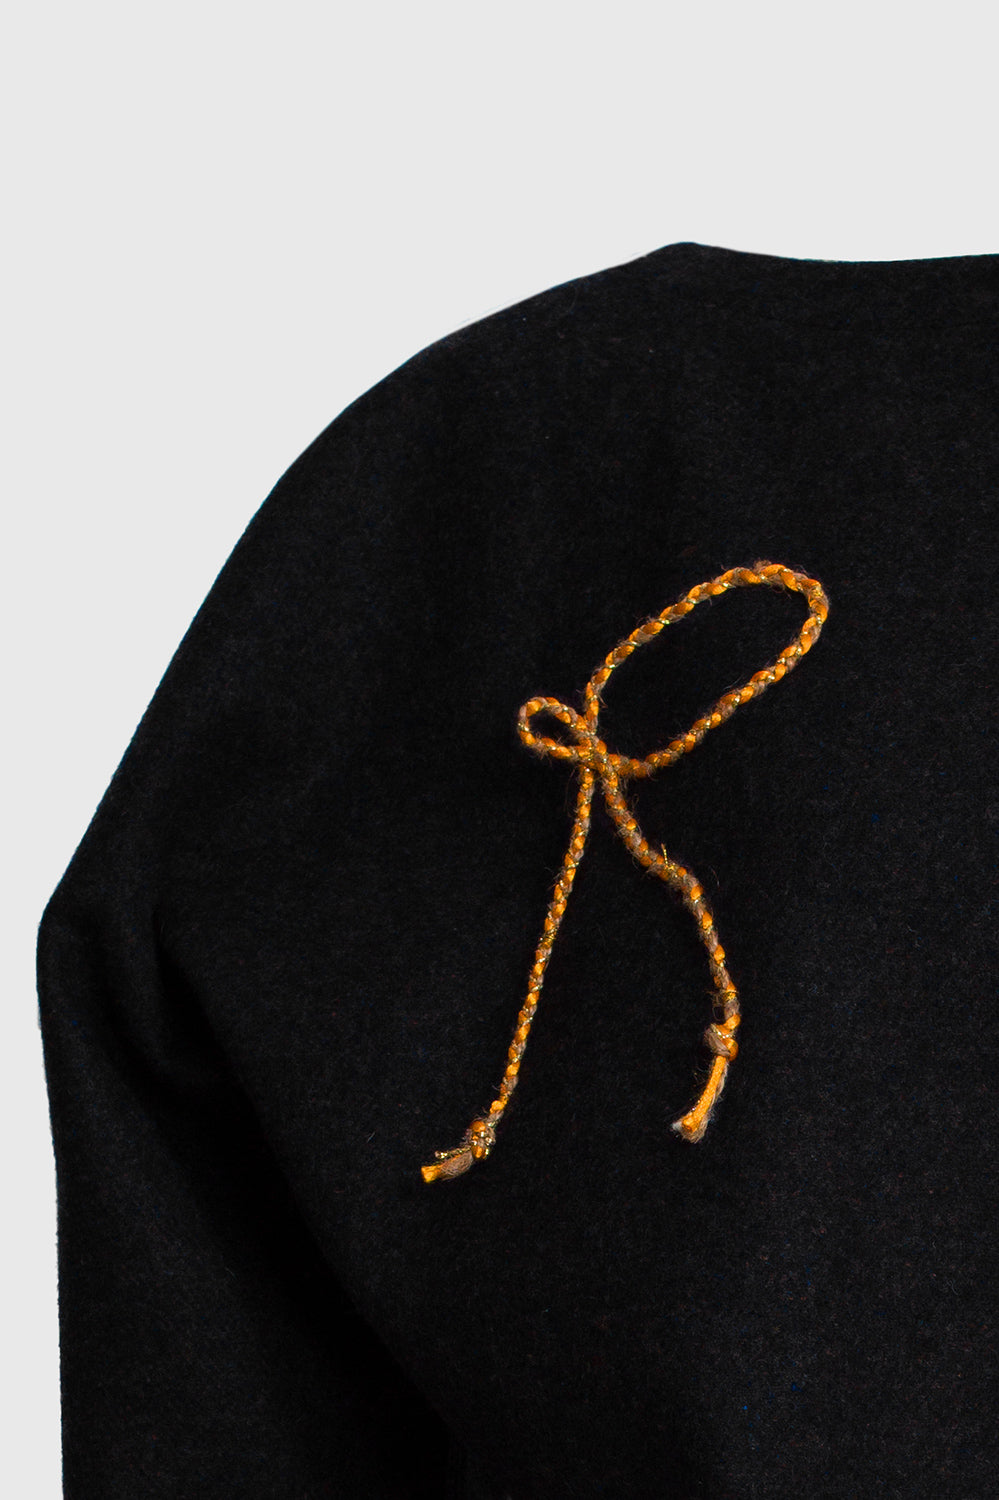 women's sweater with feminine embroidery, gold and orange thread, delicate and subline